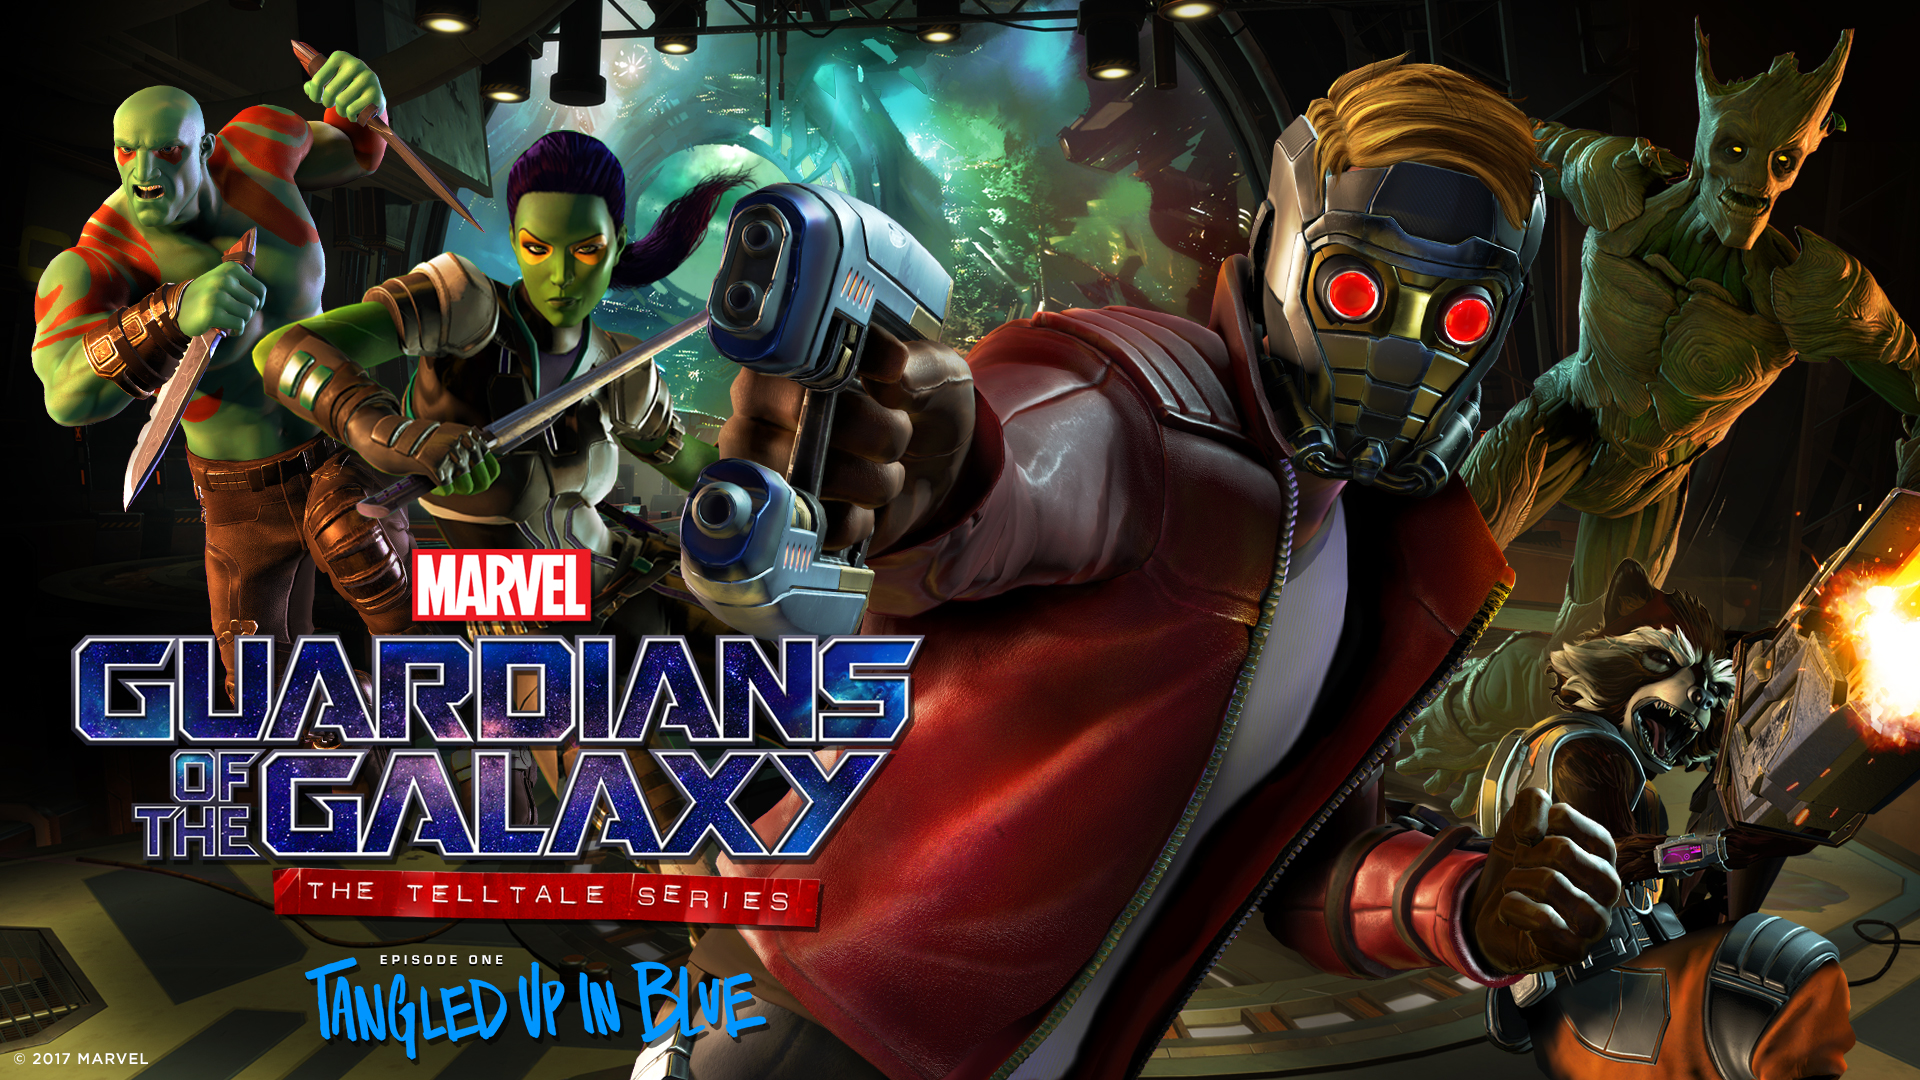 Telltale Games and Marvel Premiere Trailer for Marvel’s Guardians of the Galaxy: The Telltale Series